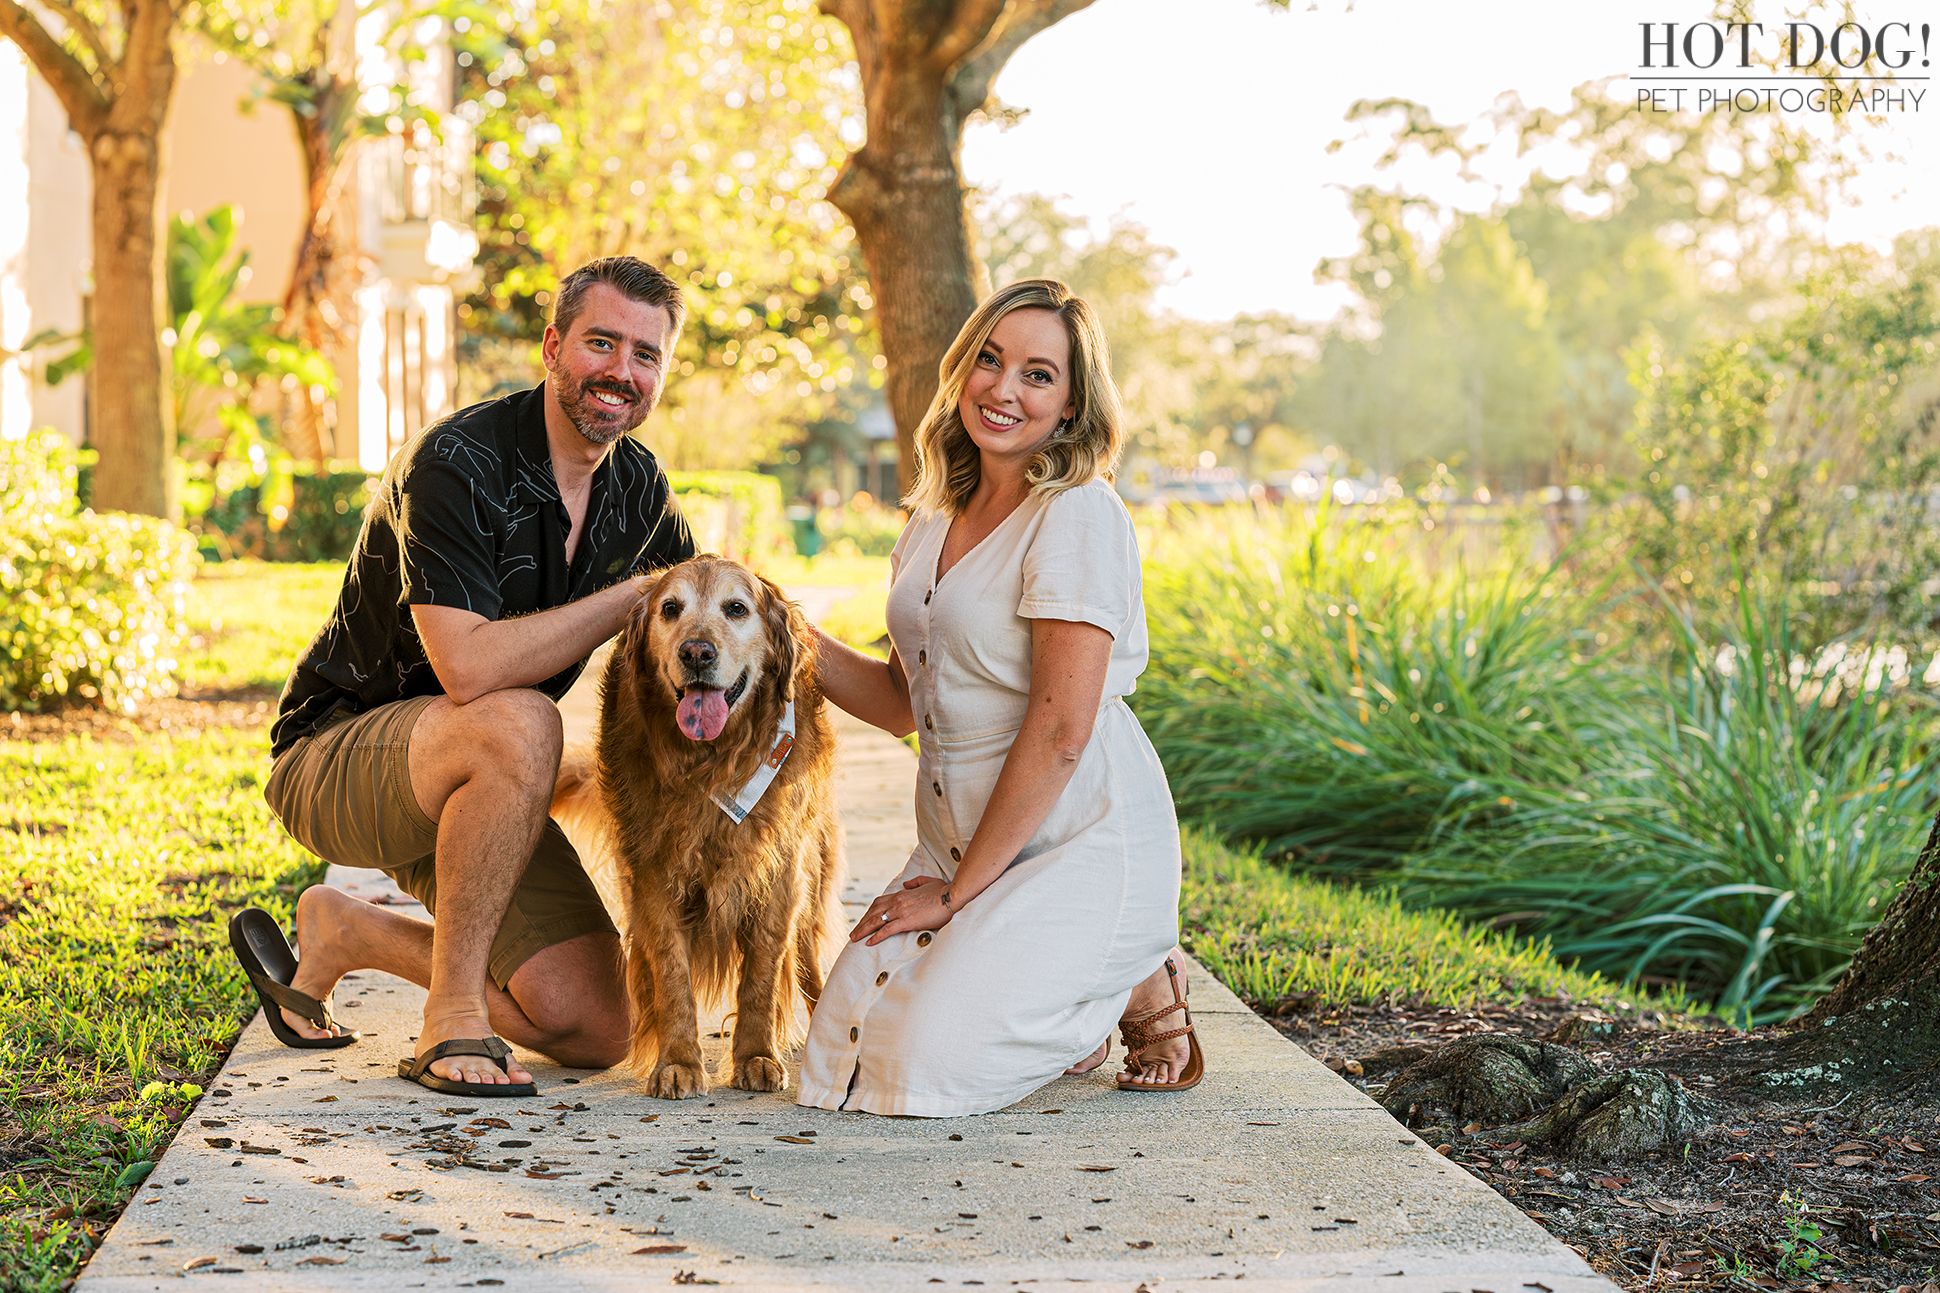 Thirteen Years of Love: Celebrate 13 years of cherished companionship with Osho, the senior golden retriever, and his devoted family in the idyllic town of Celebration, Florida. (Photo by Hot Dog! Pet Photography)